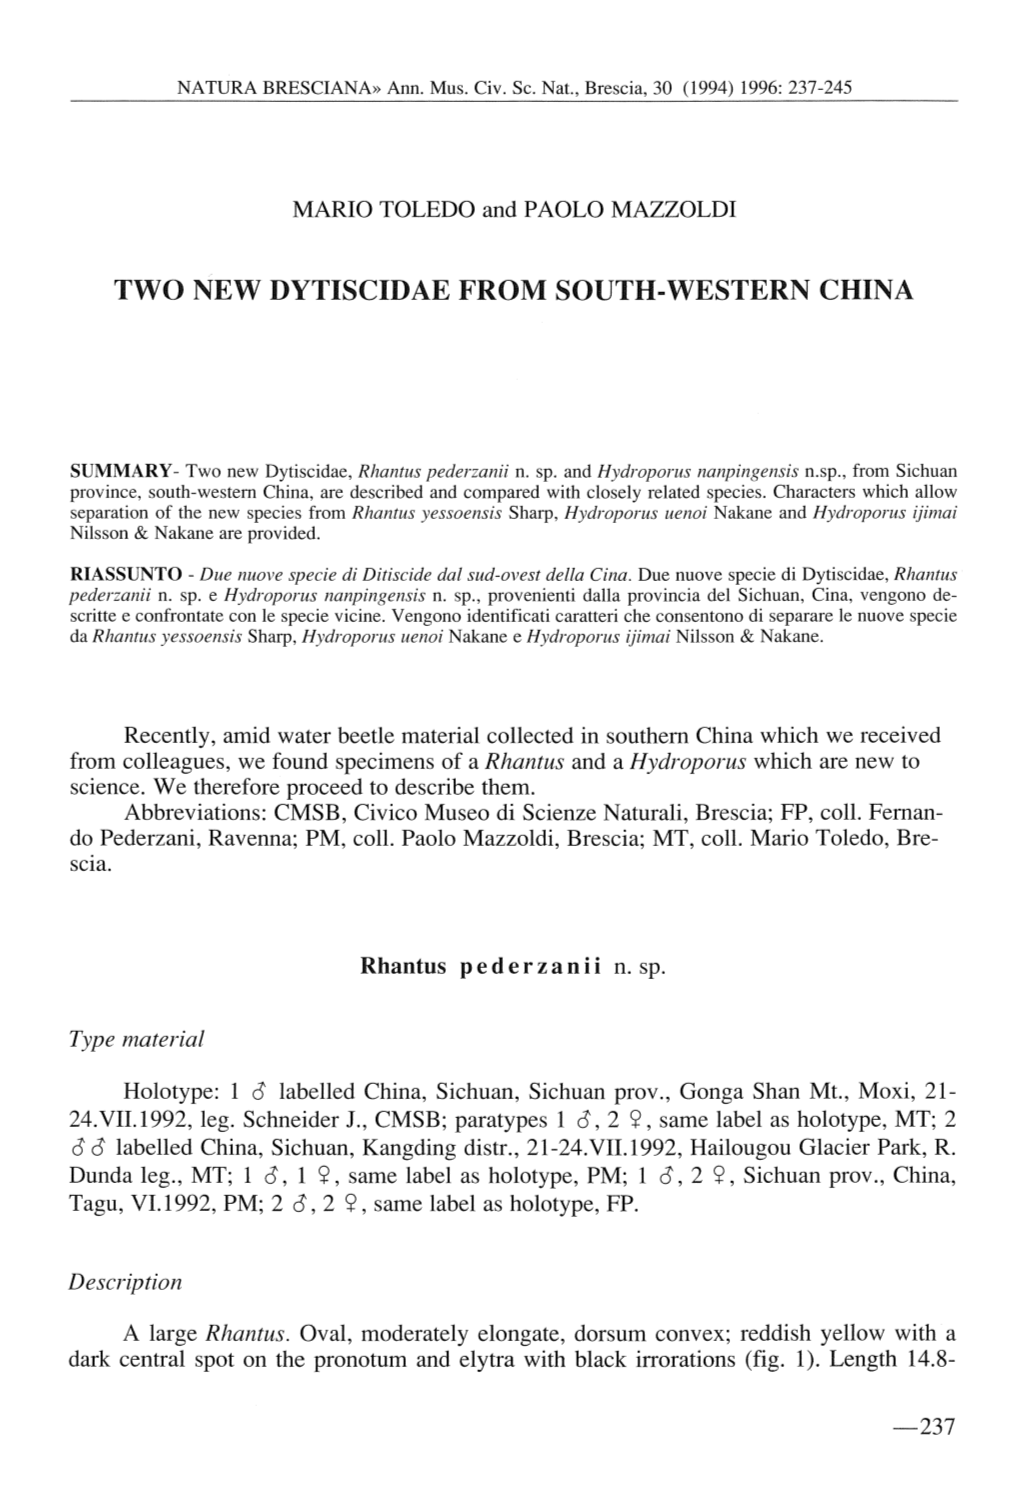 Two New Dytiscidae from South-Western China